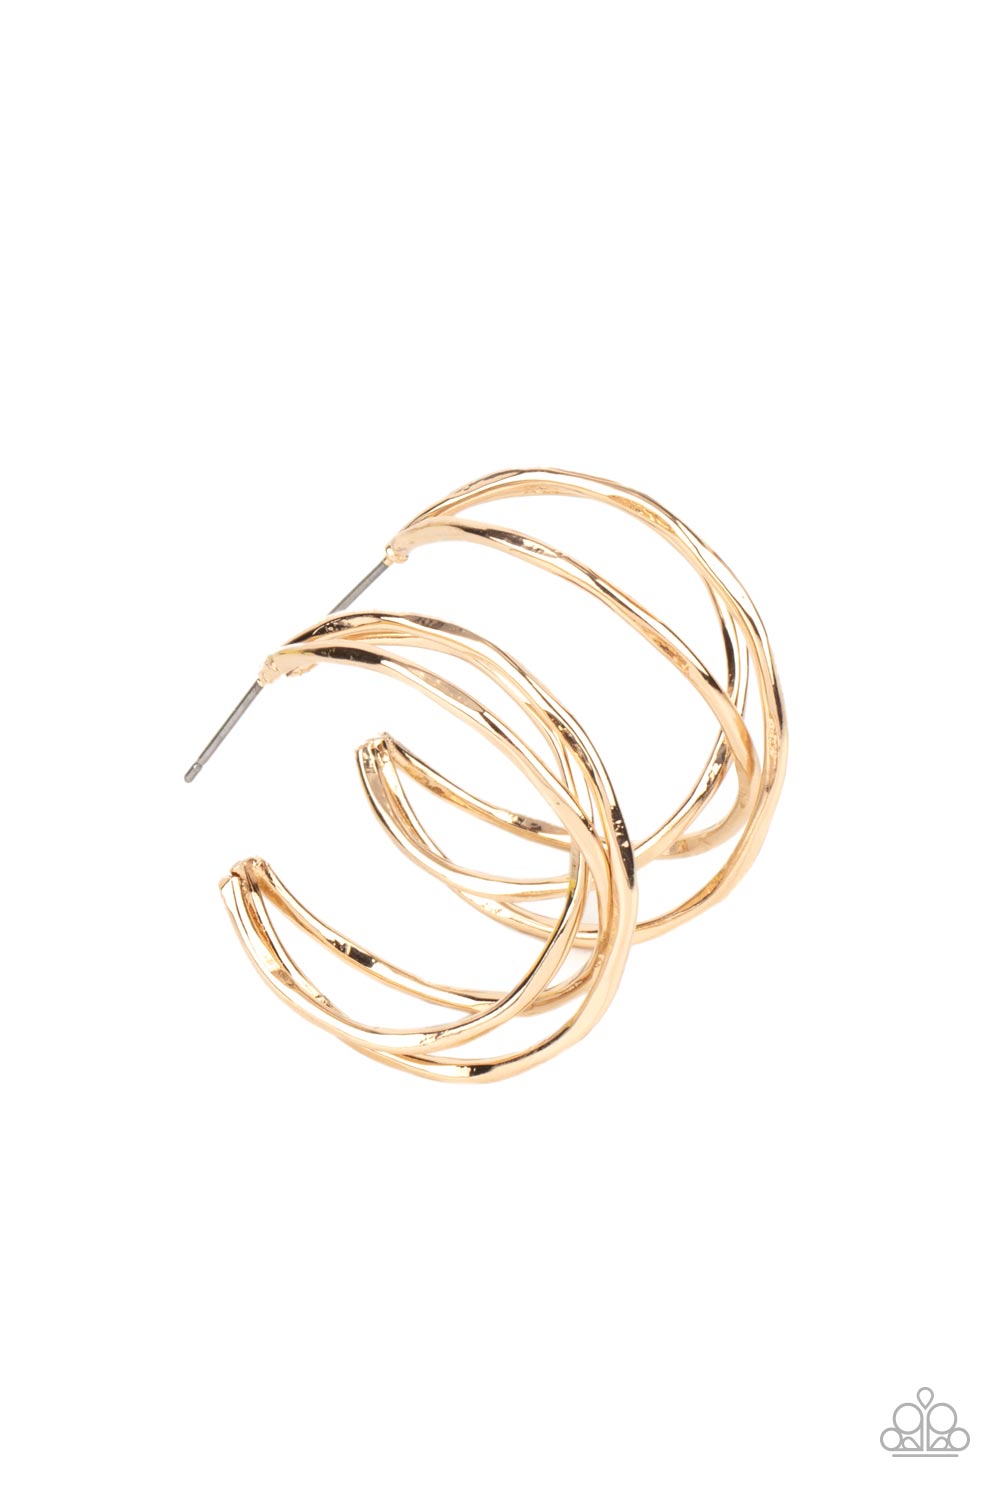 City Contour Gold Hoop Earring - Paparazzi Accessories  Glistening gold bars delicately overlap into a 3-dimensional frame, creating a dramatic hoop. Earring attaches to a standard post fitting. Hoop measures approximately 1" in diameter.  Sold as one pair of hoop earrings.